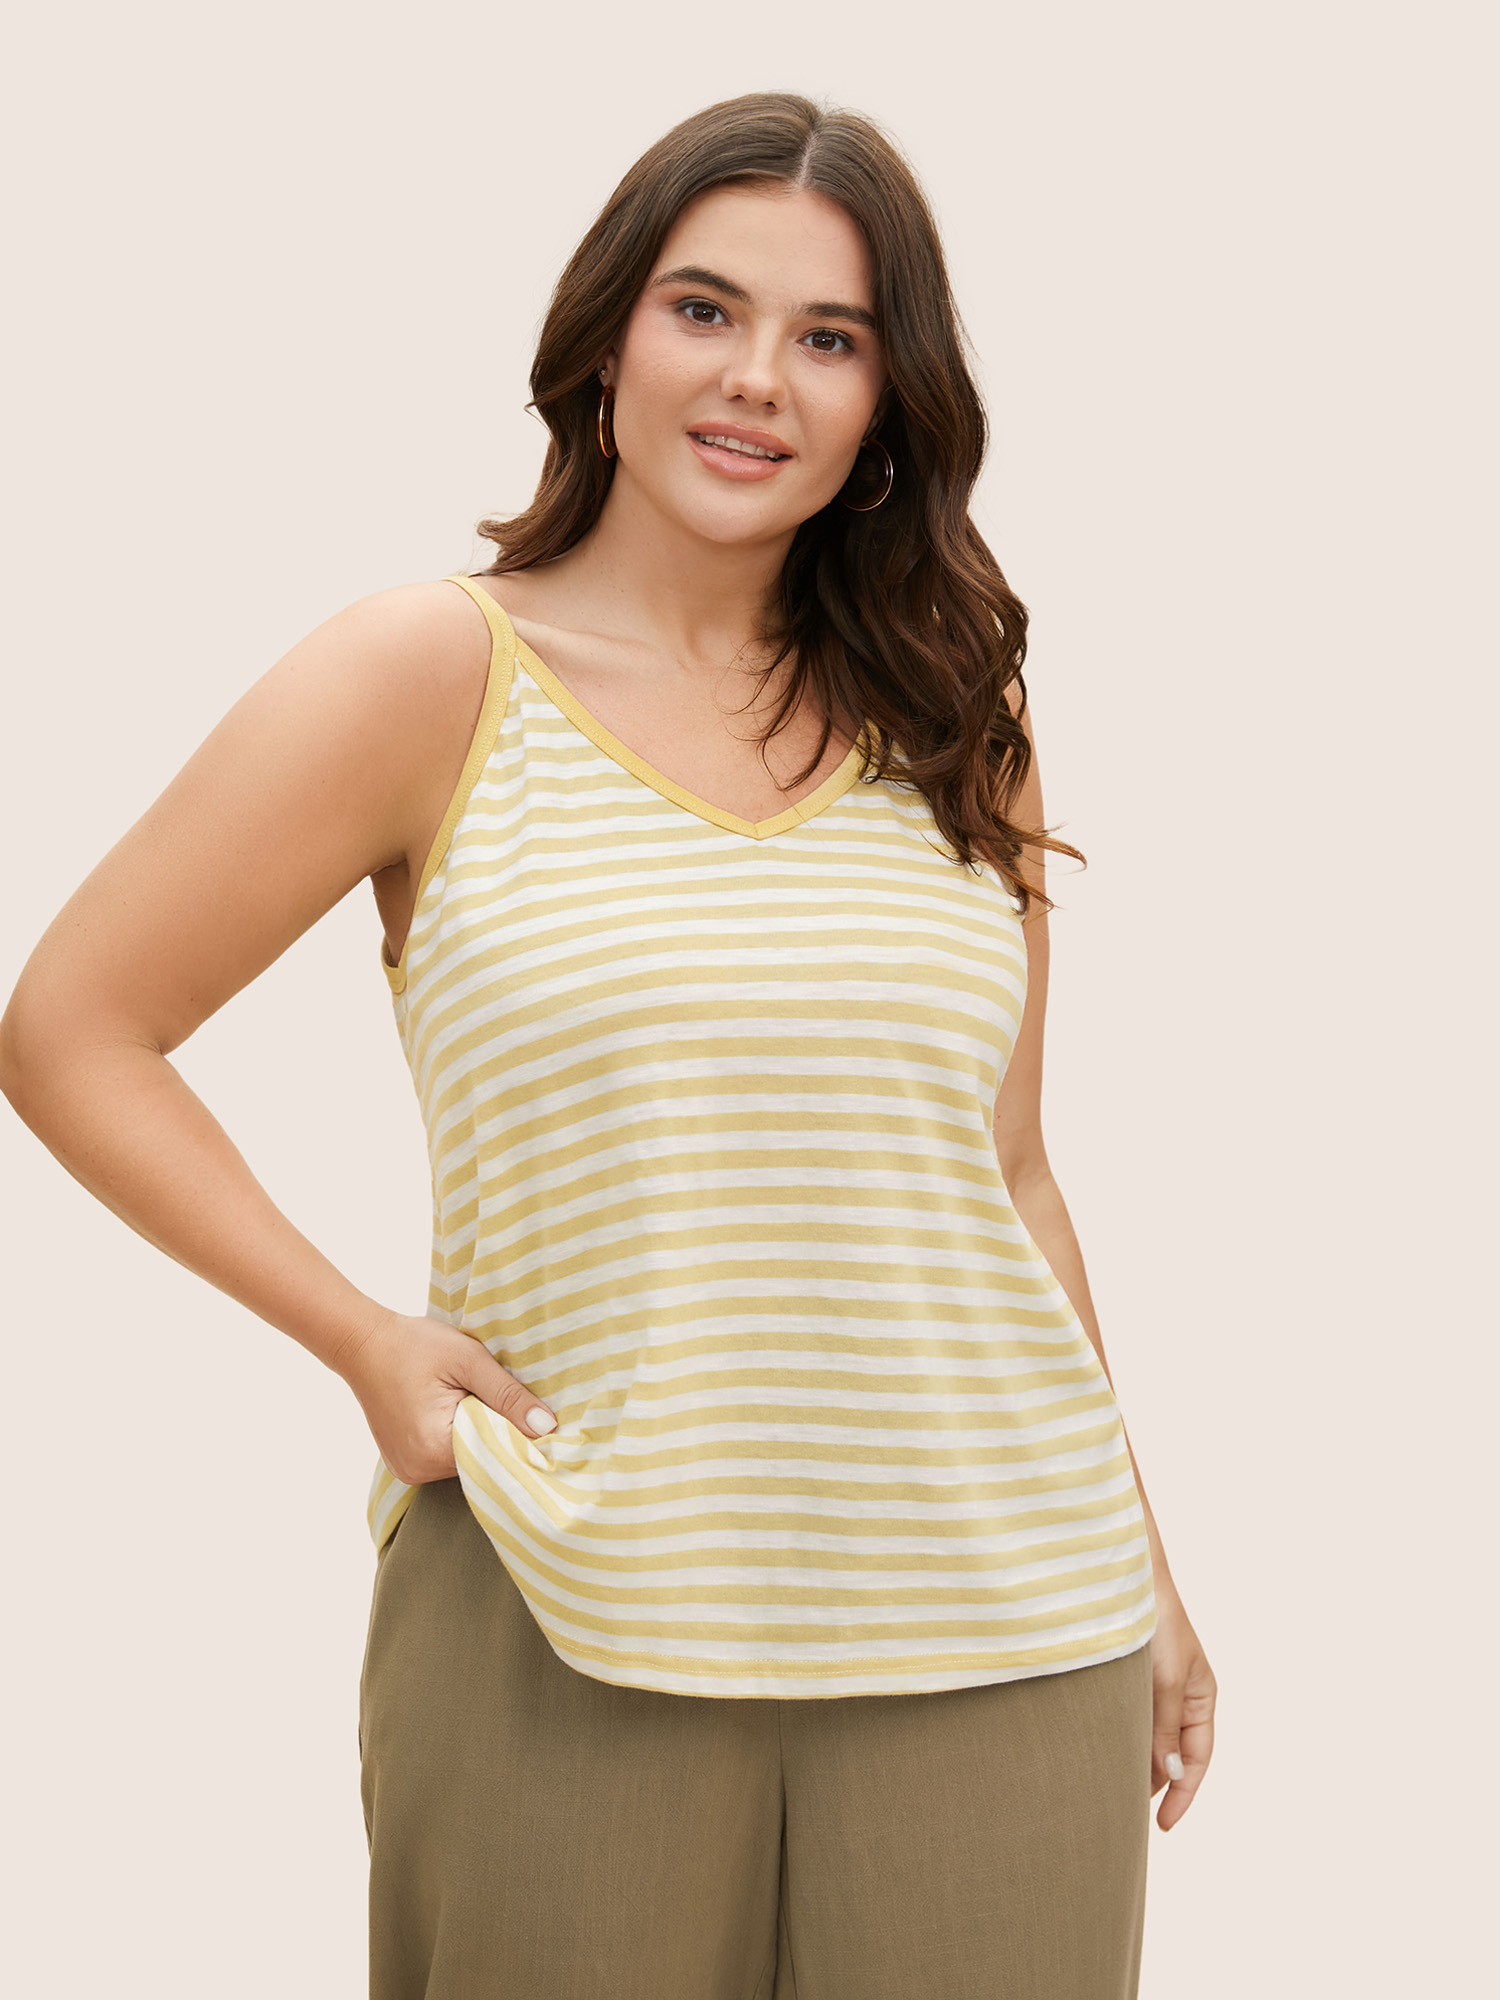 

Plus Size Cotton Contrast Striped Adjustable Straps Cami Top Women Lightyellow Casual Contrast V-neck Everyday Tank Tops Camis BloomChic